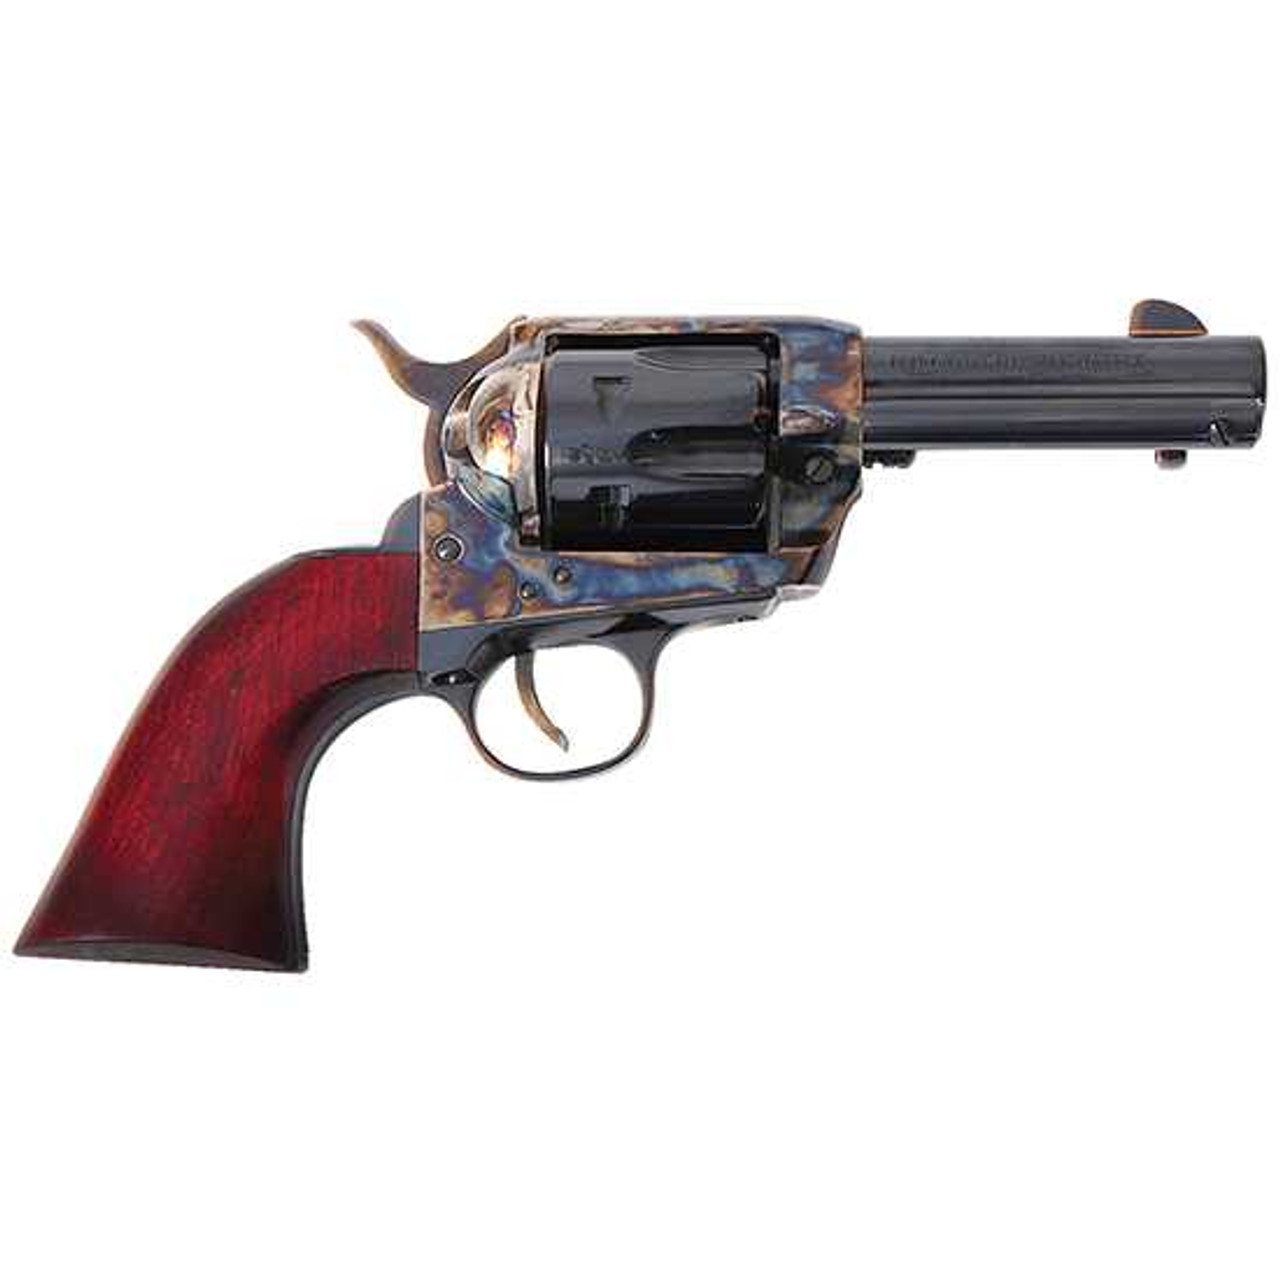 TRAD FRONTIER 1873 3.5 357MAG CCH SHERIFF'S MDL